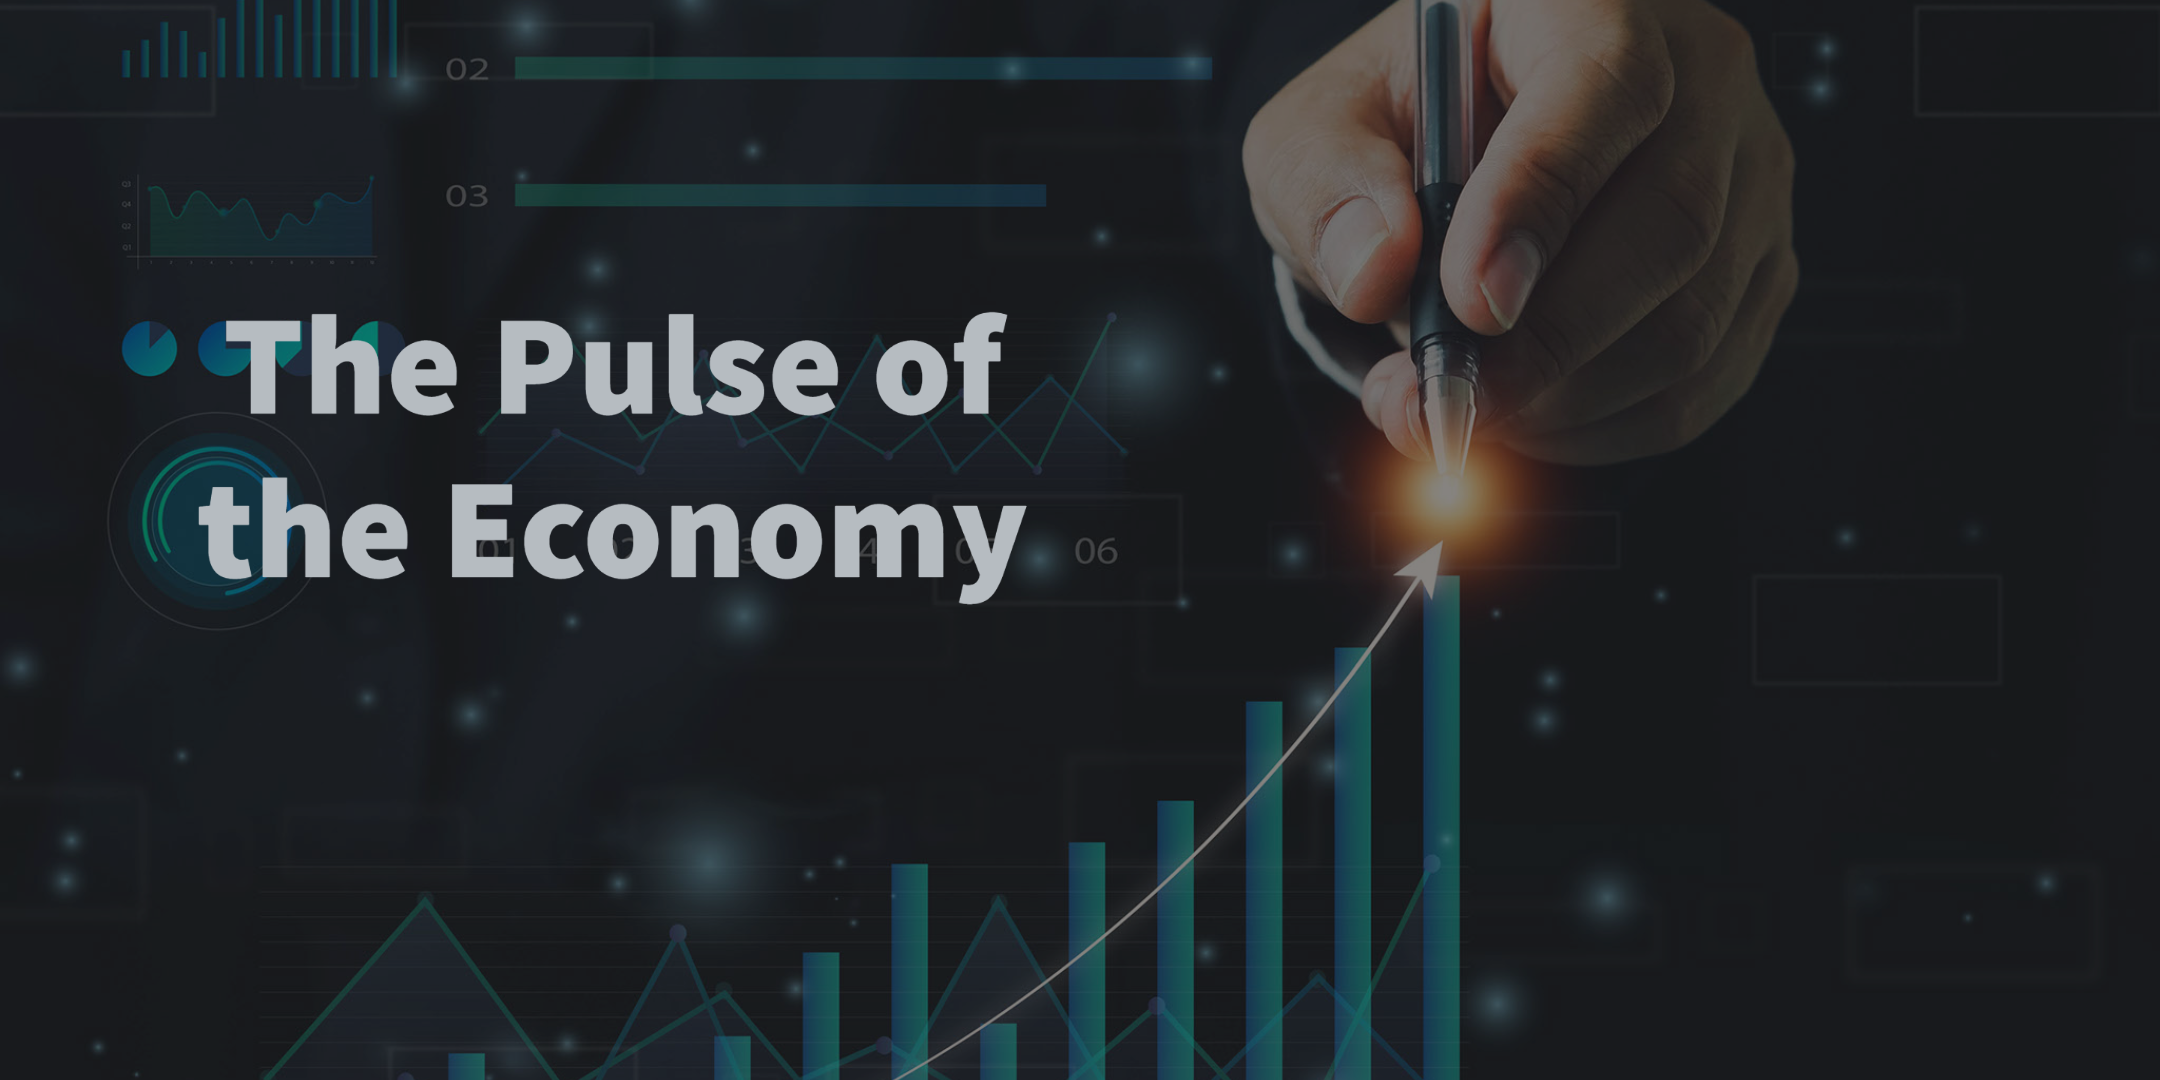 The-Pulse-of-the-Economy-1